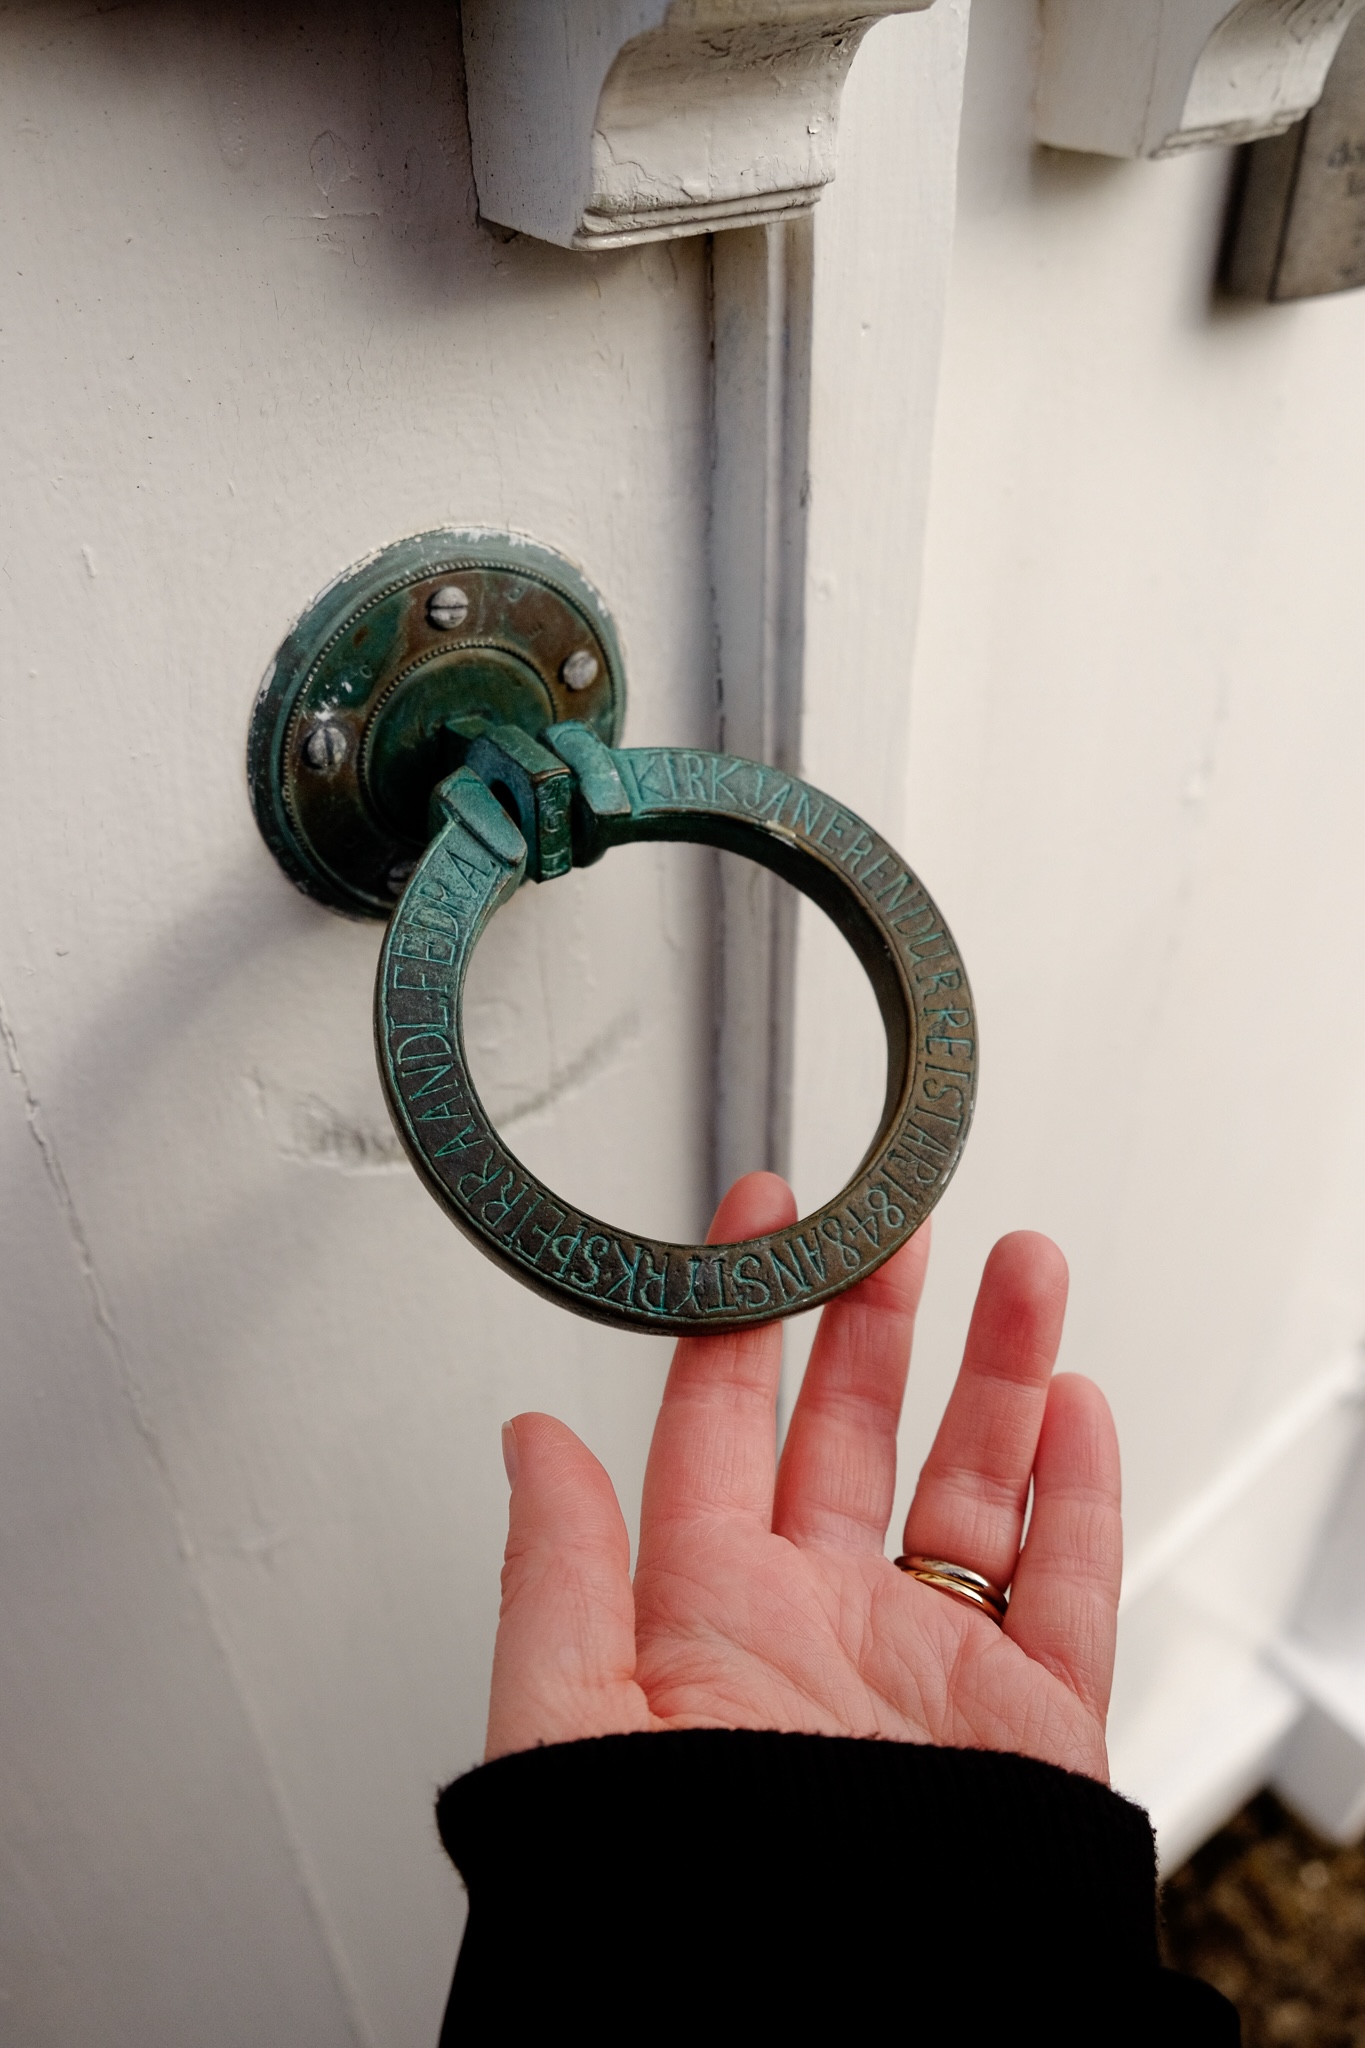 A copper door handle in the shape of a ring turning turquoise through oxidation with an Icelandic inscription etched into it